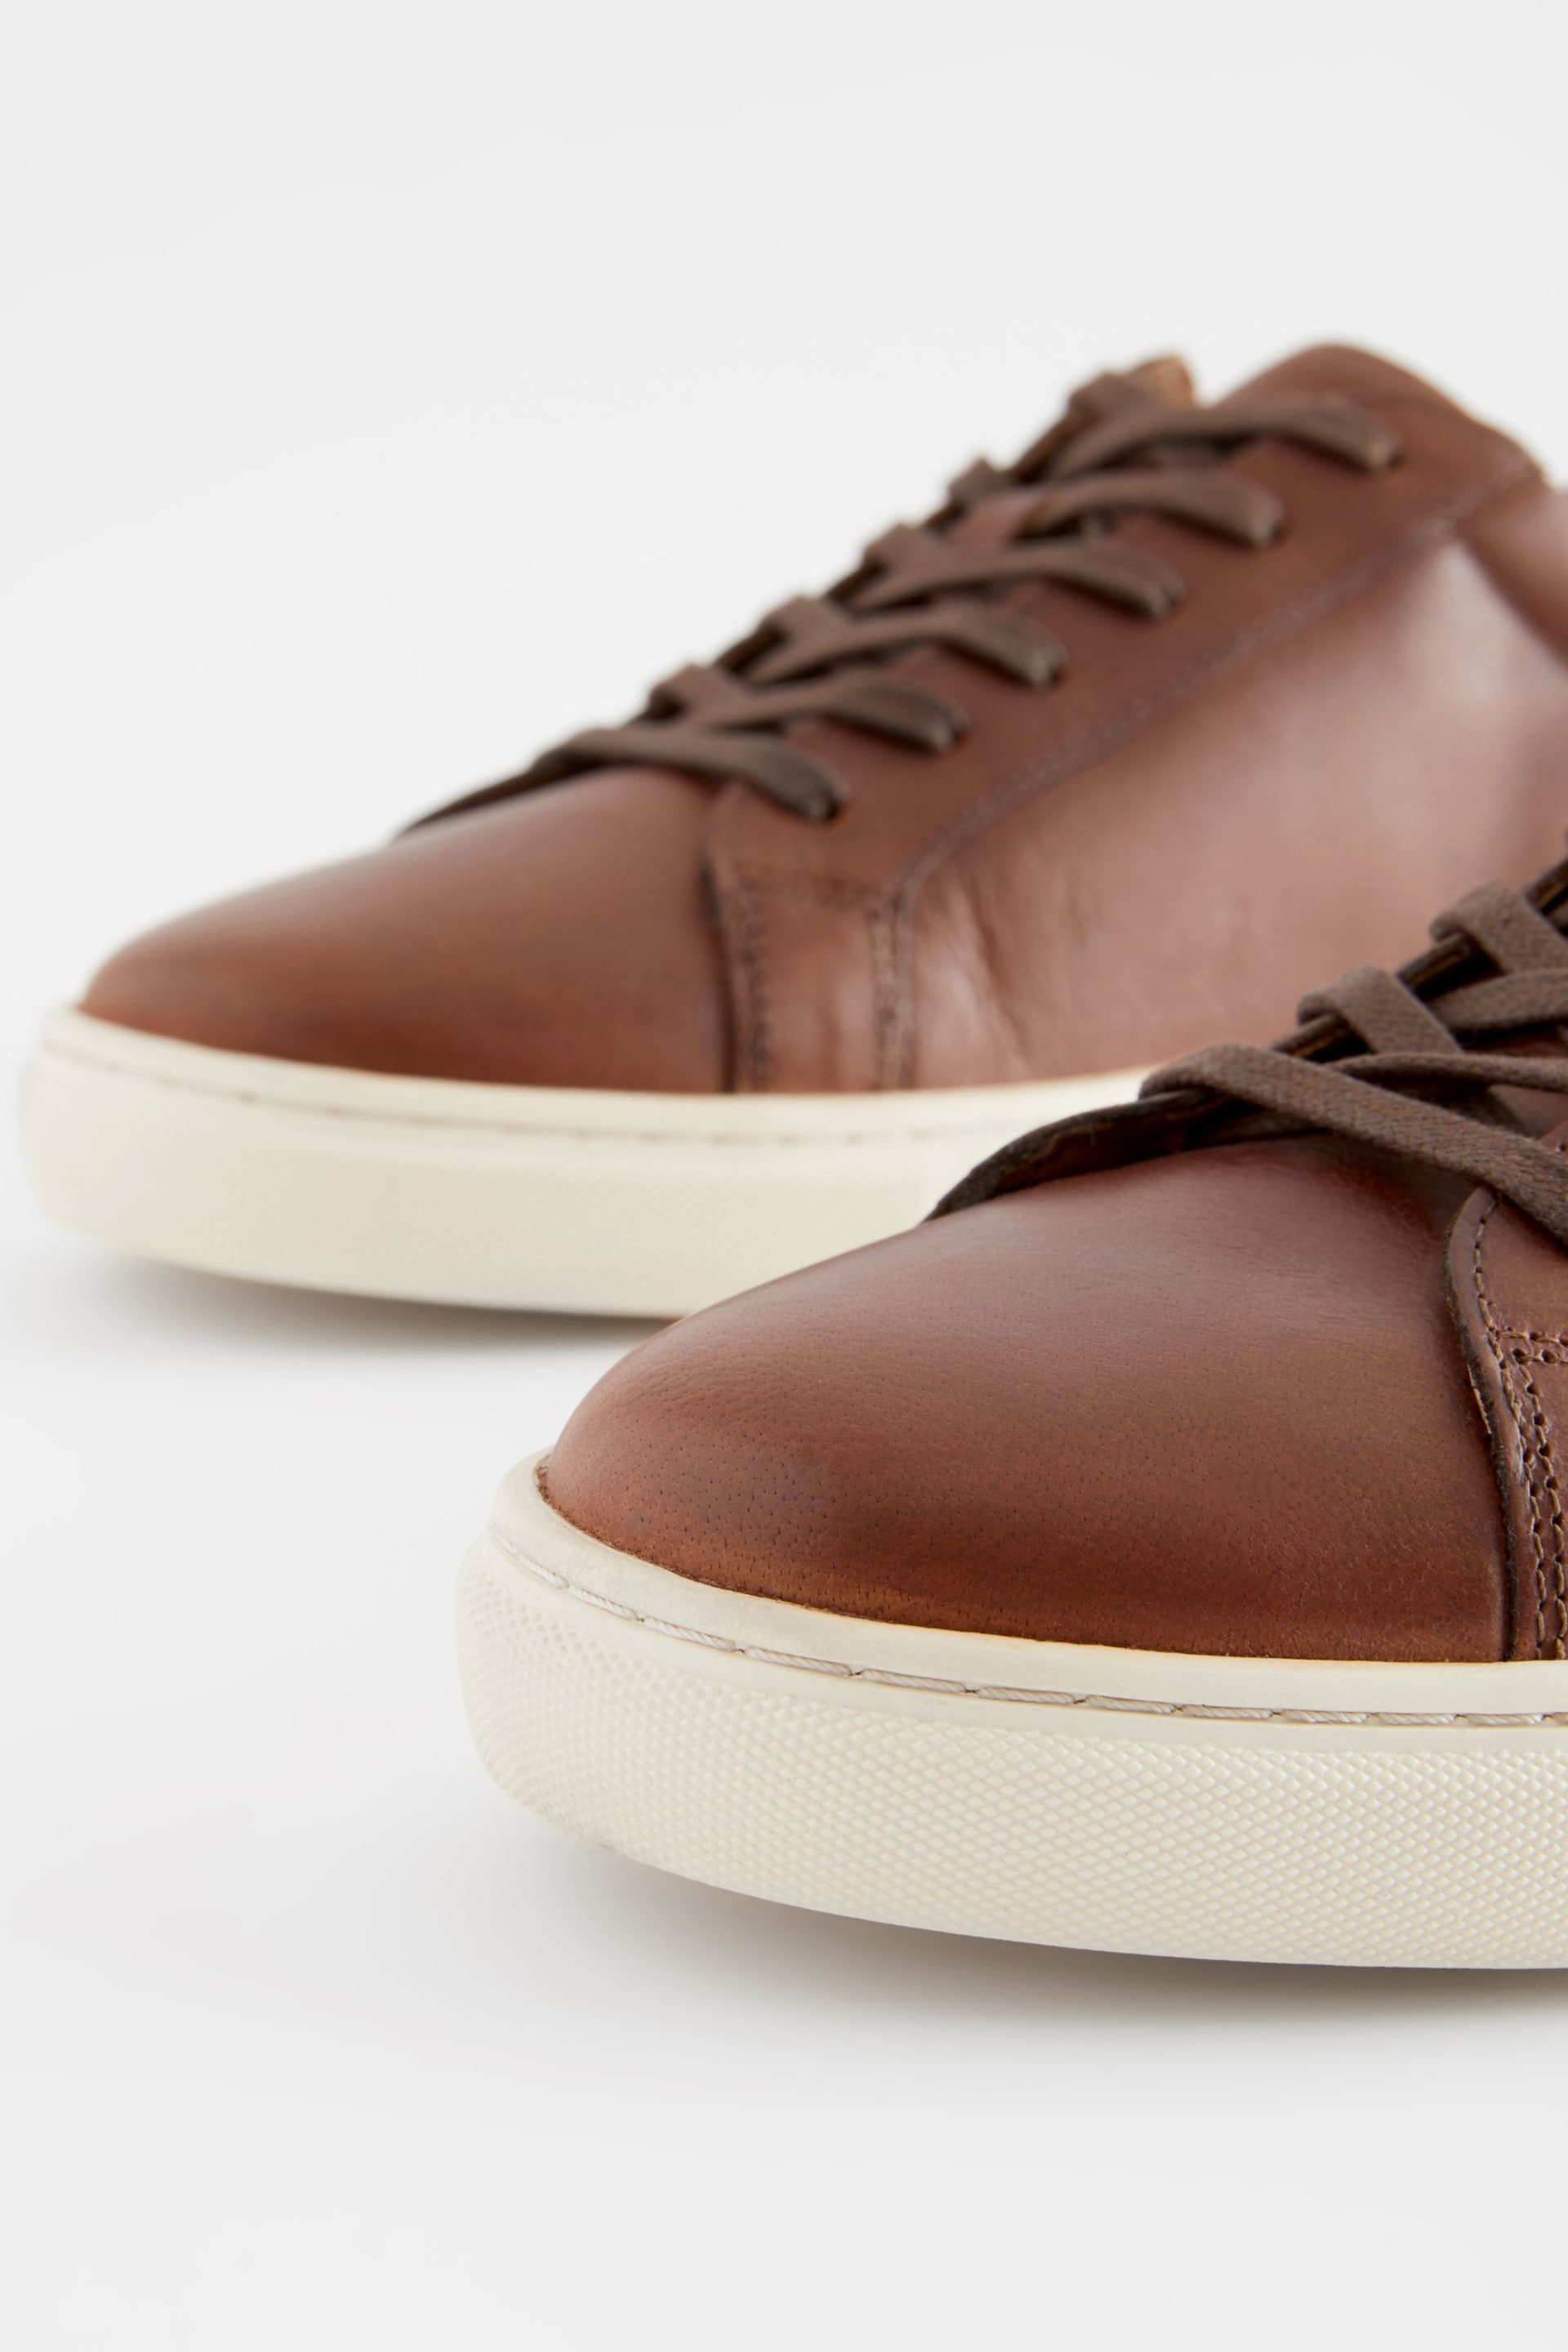 Tan Brown Leather Trainers - Image 4 of 6